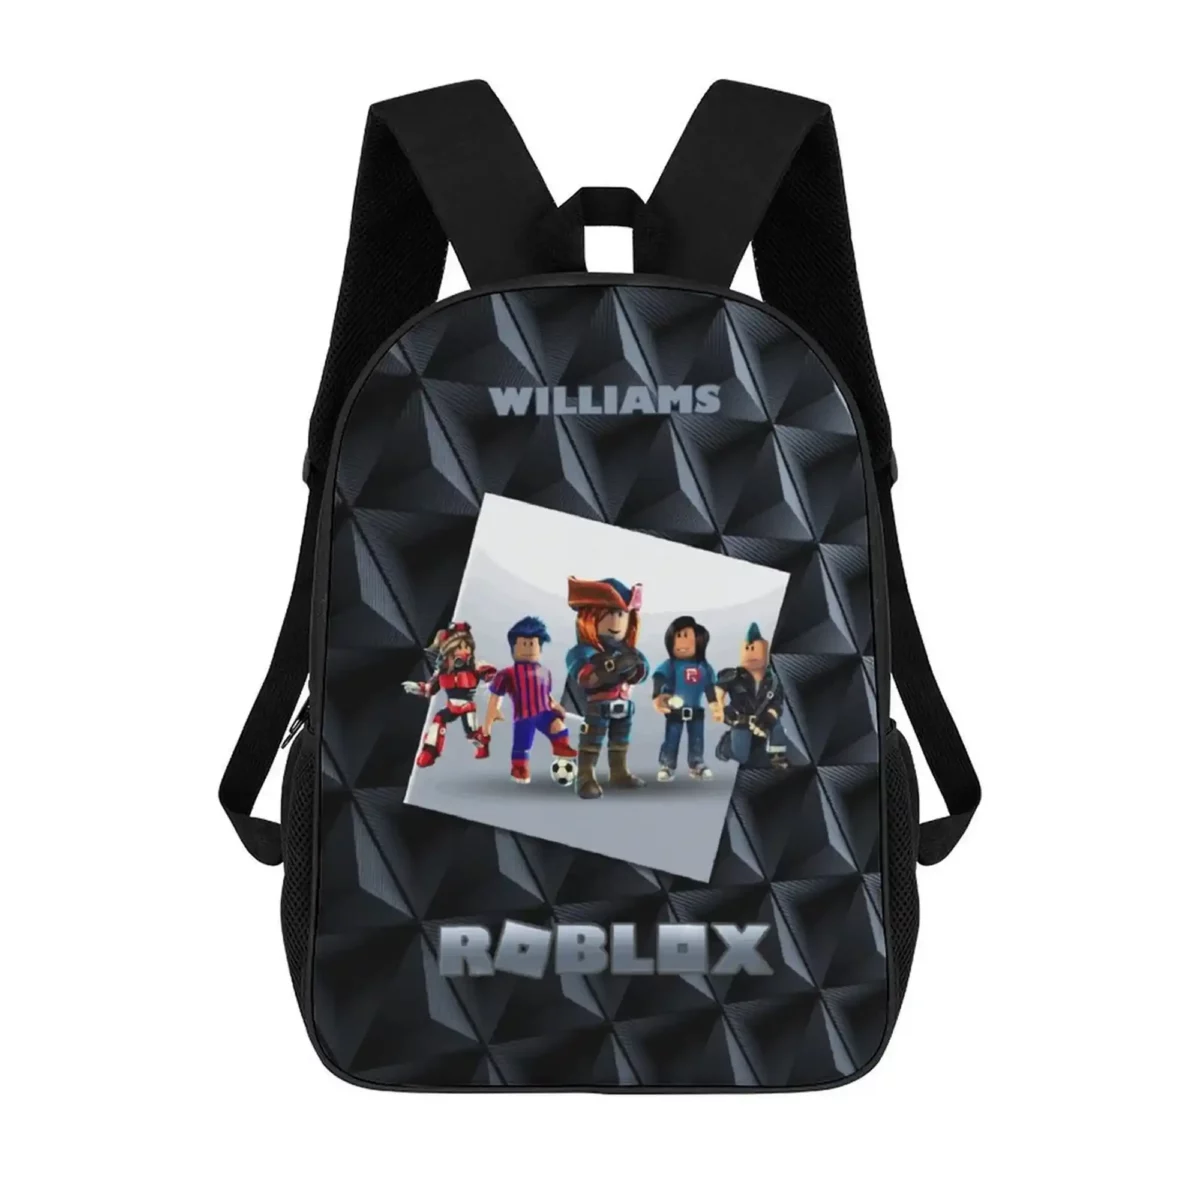 Personalized Black Roblox Backpack – Customizable Gift for Kids Cool Kiddo 16